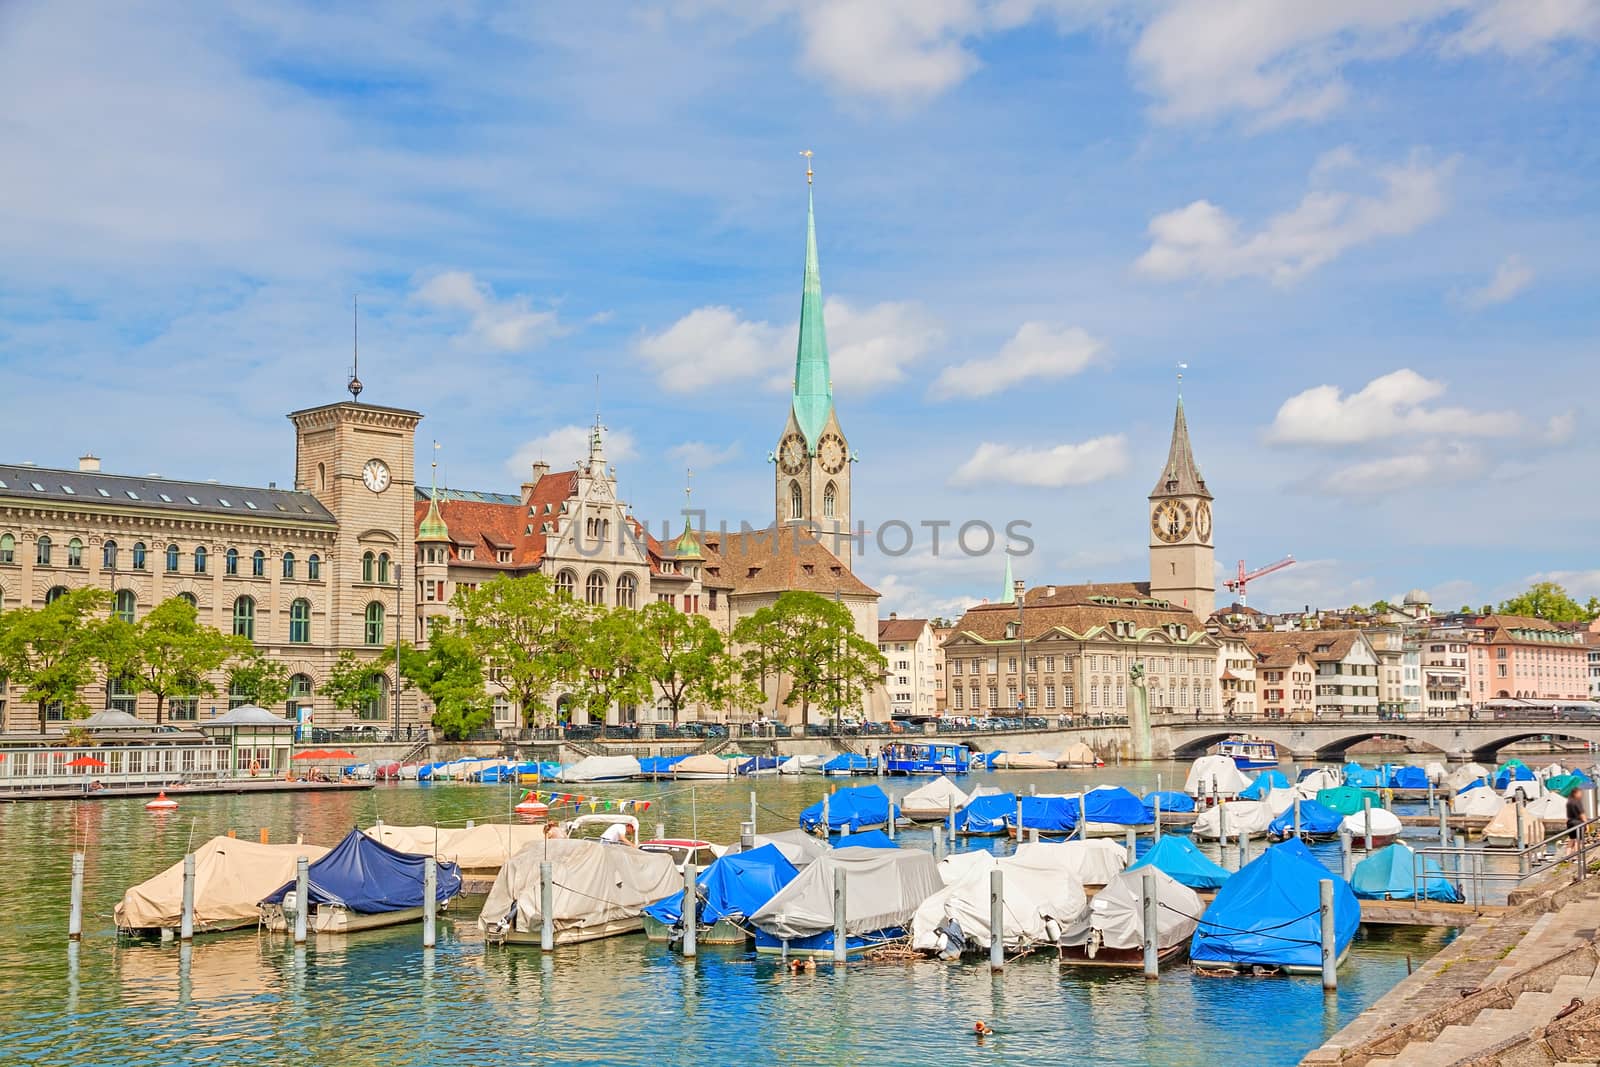 Panorama of historical part of Zurich with famous Fraumunster and St. Peter church on a beautiful summer day, Switzerland.